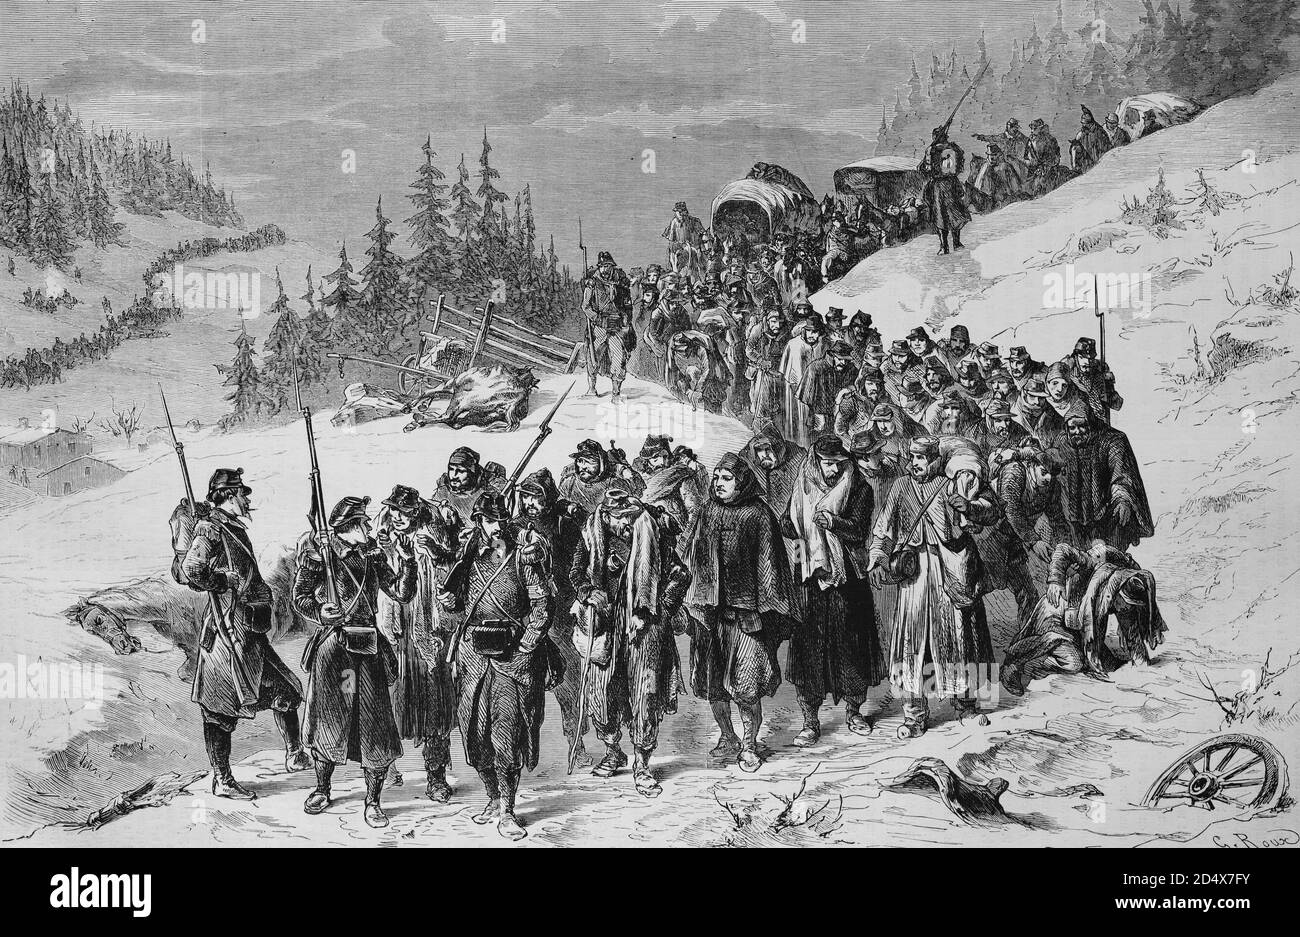 Swiss military escorting french solders in Neuchatel Jura on 3 January 1871, illustrated war history, German - French war 1870-1871 Stock Photo